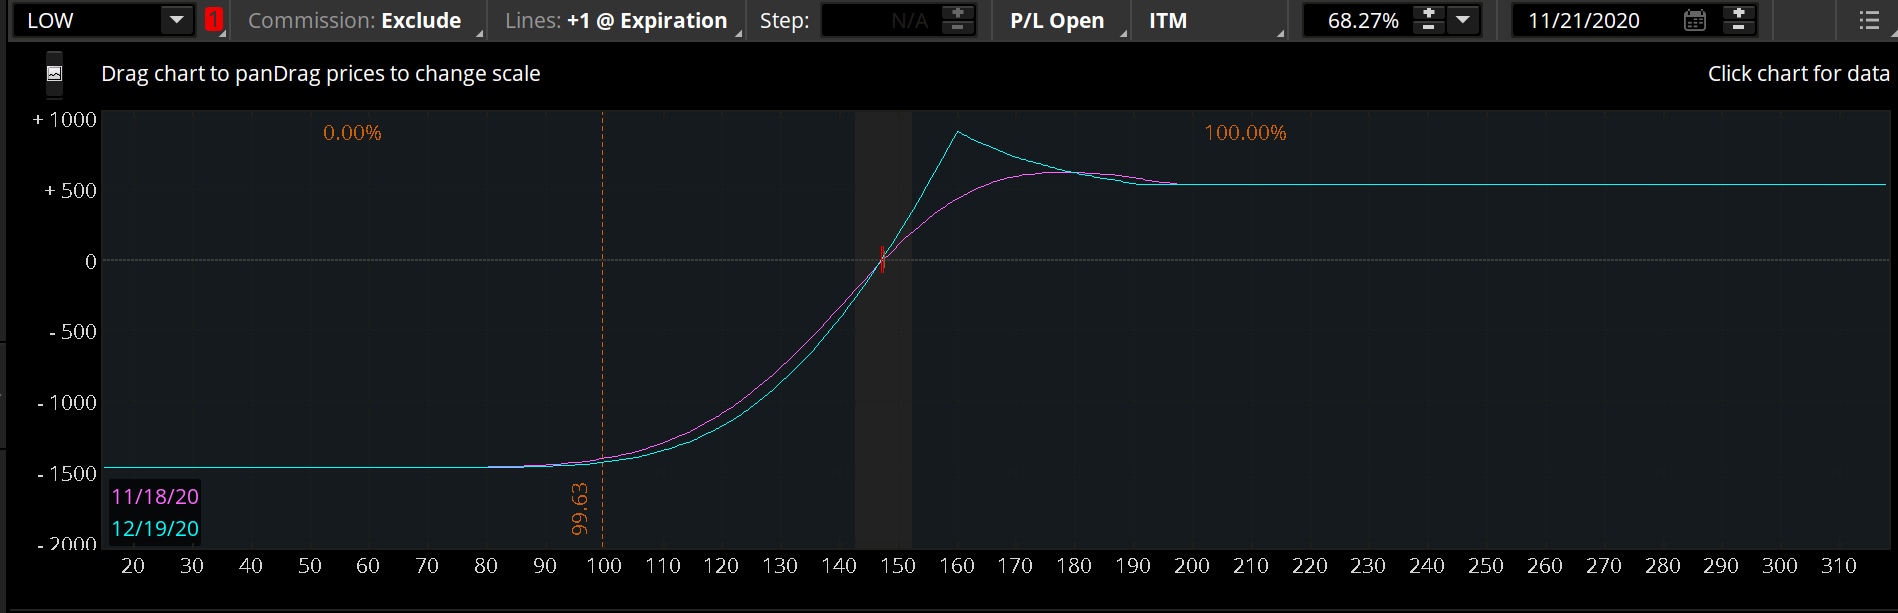 $LOW Diagonal Spread risk graph on TOS.